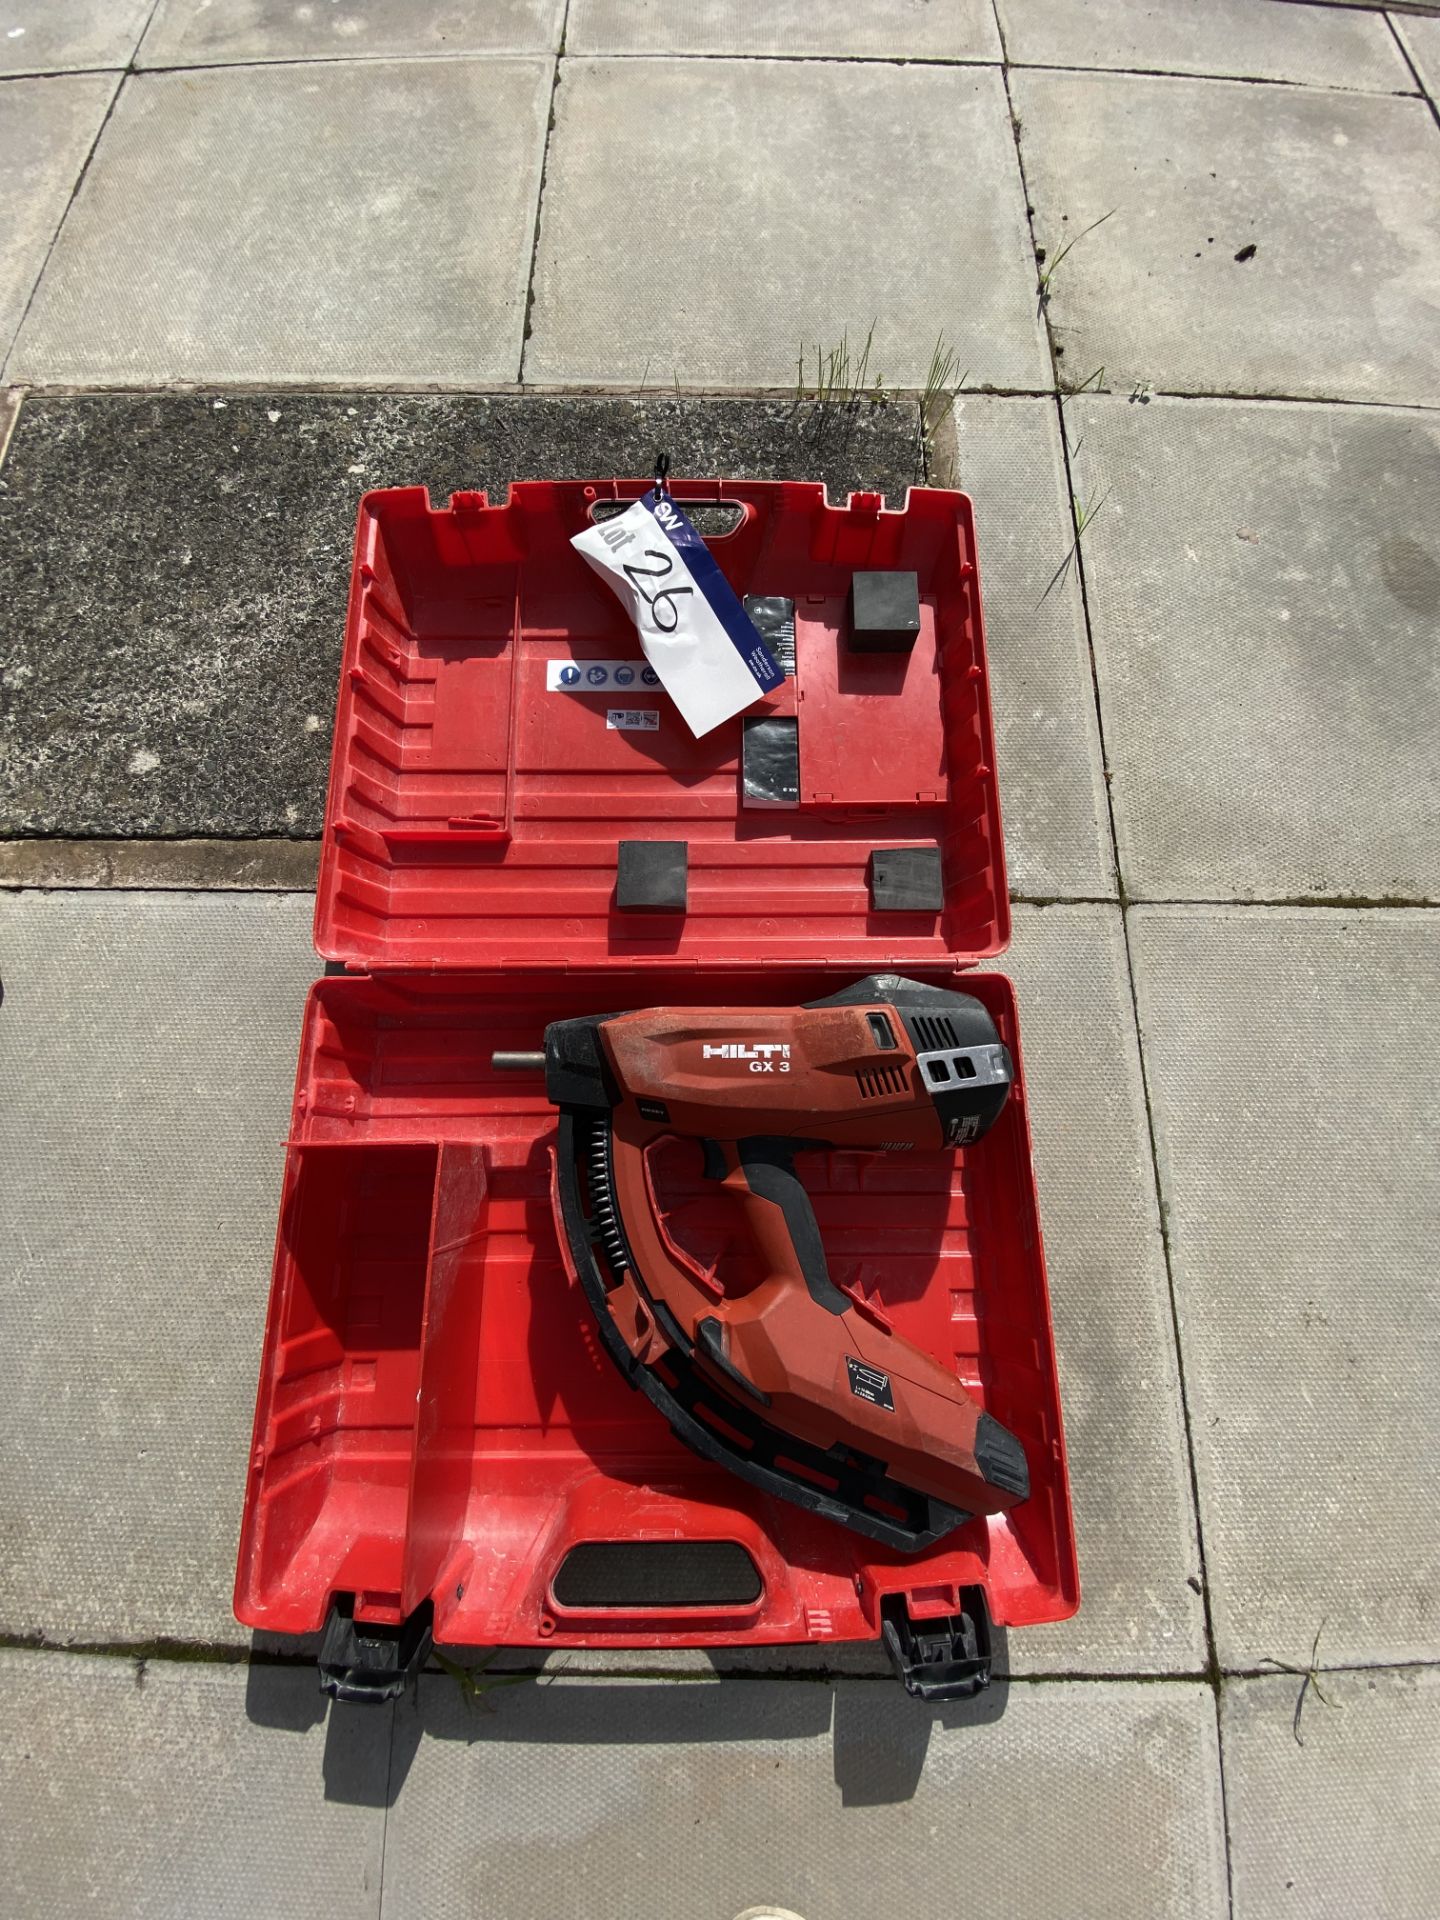 Hilti GX 3 Gas Nail Gun, with carry casePlease read the following important notes:- ***Overseas